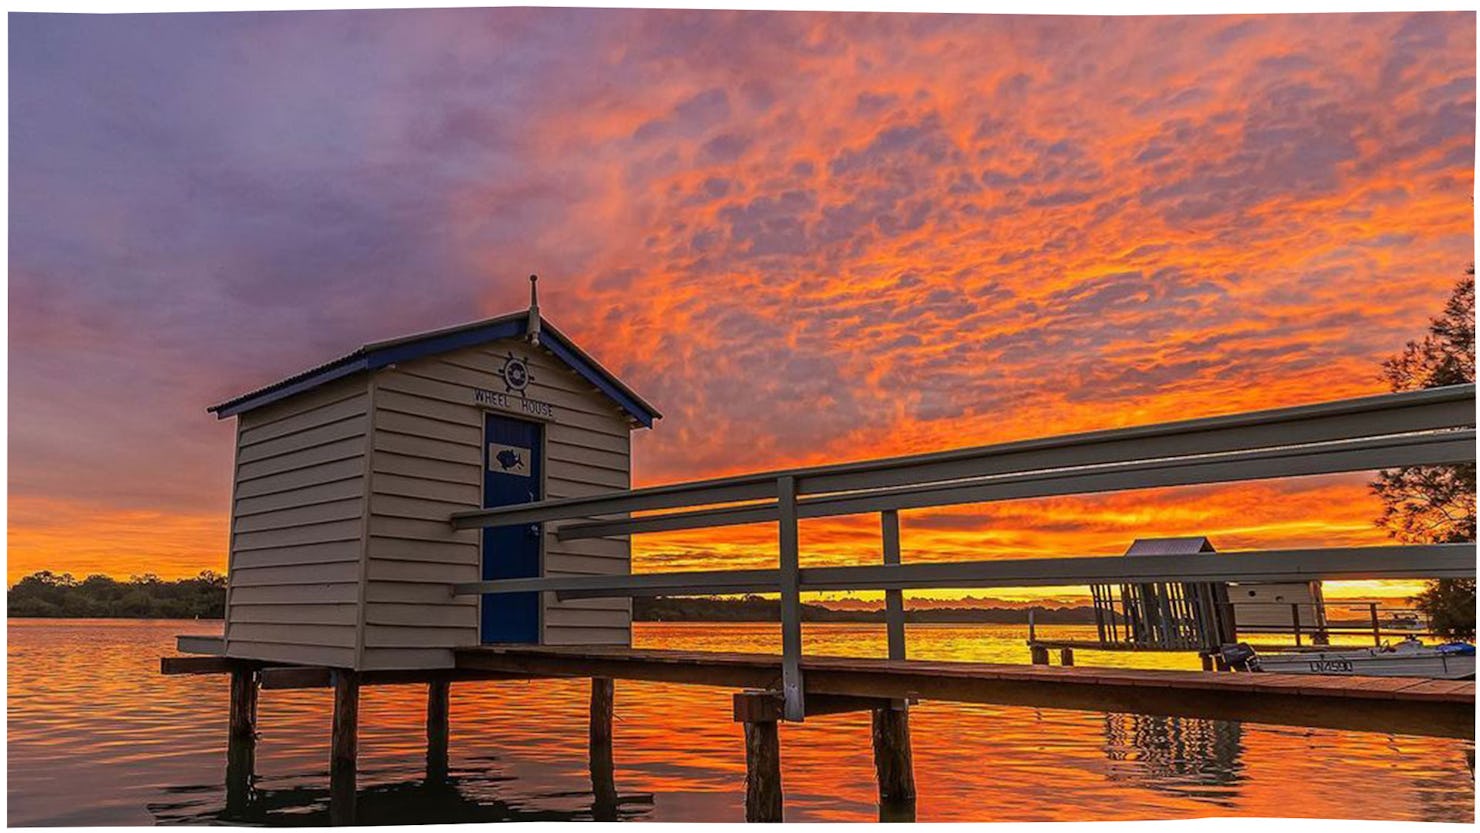 Boat sheds in Maroochydore. Credit: @chippieb